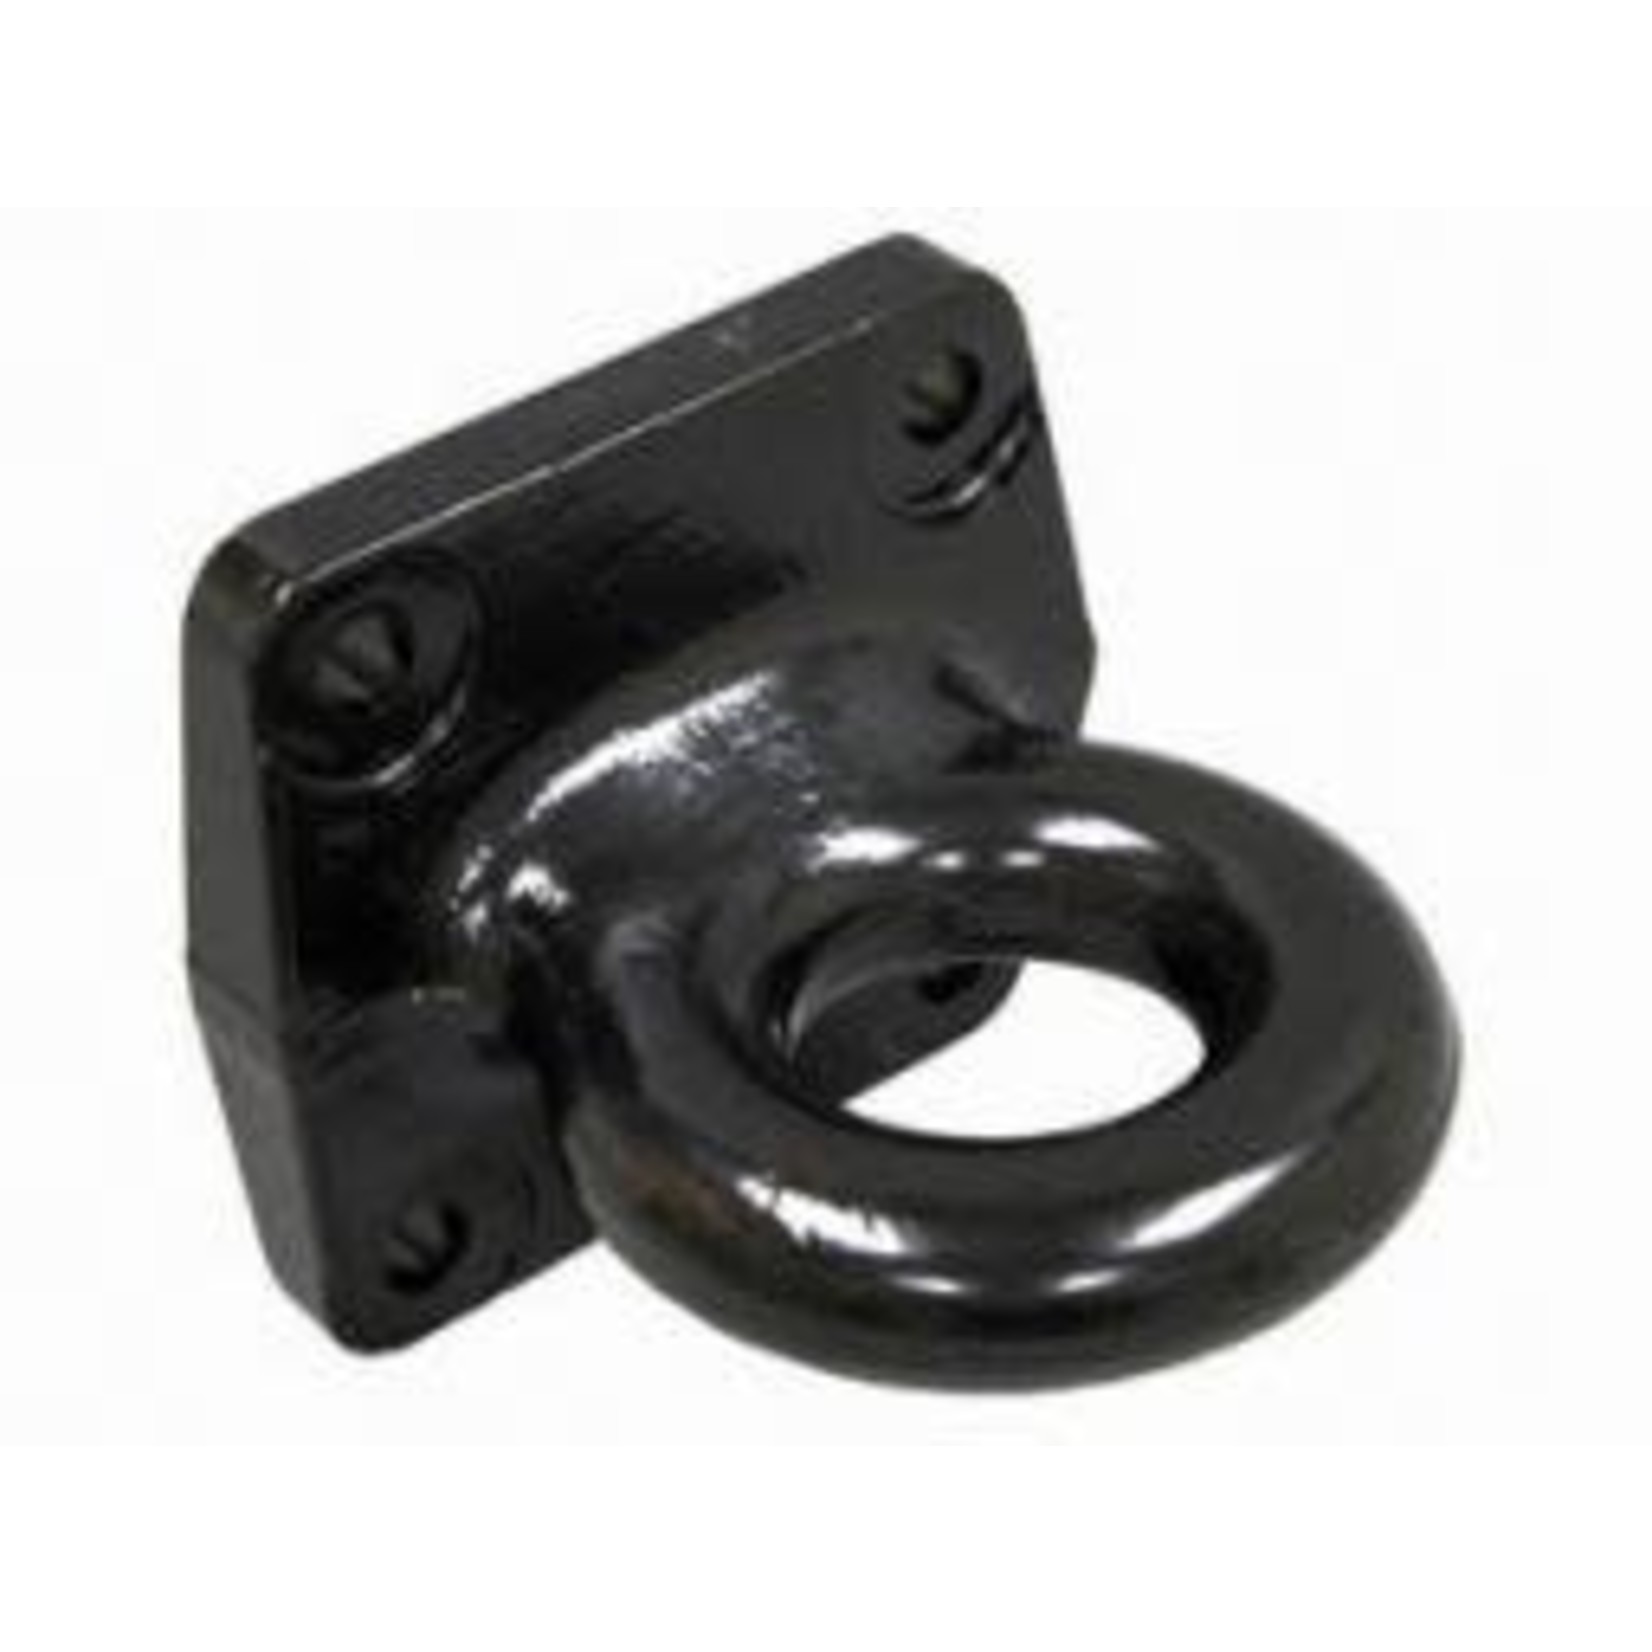 Buyers Pintle Ring, Heavy Duty 15,000# Max Vertical Load 60,000 M.G.T.W.